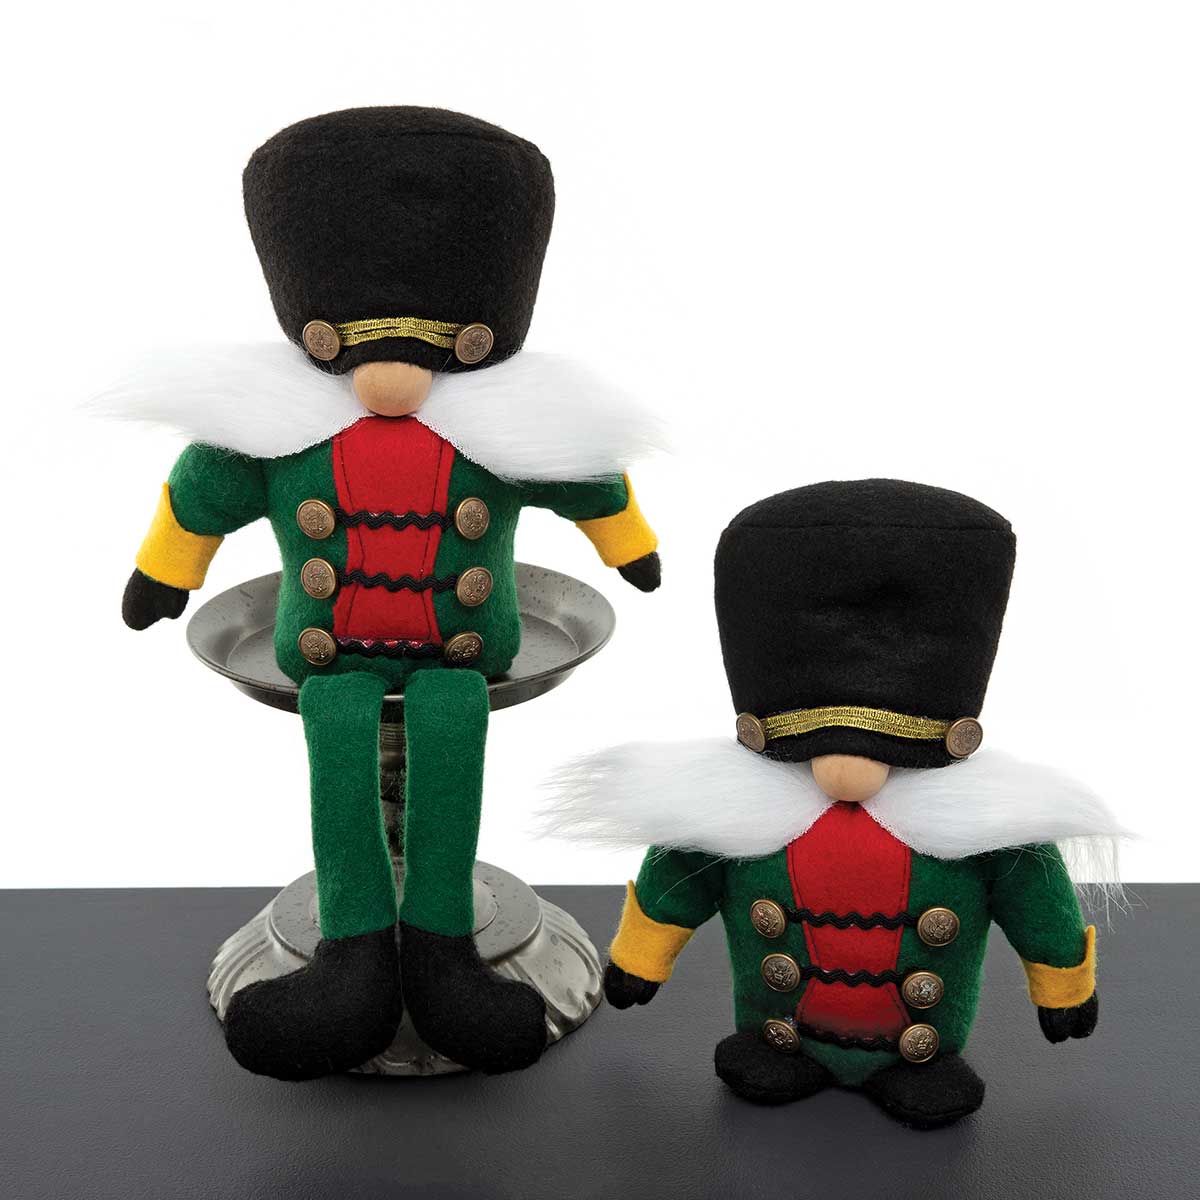 b50 GNOME NUTCRACKER WITH LEGS GR 7.5IN X 3IN X 15IN POLYESTER